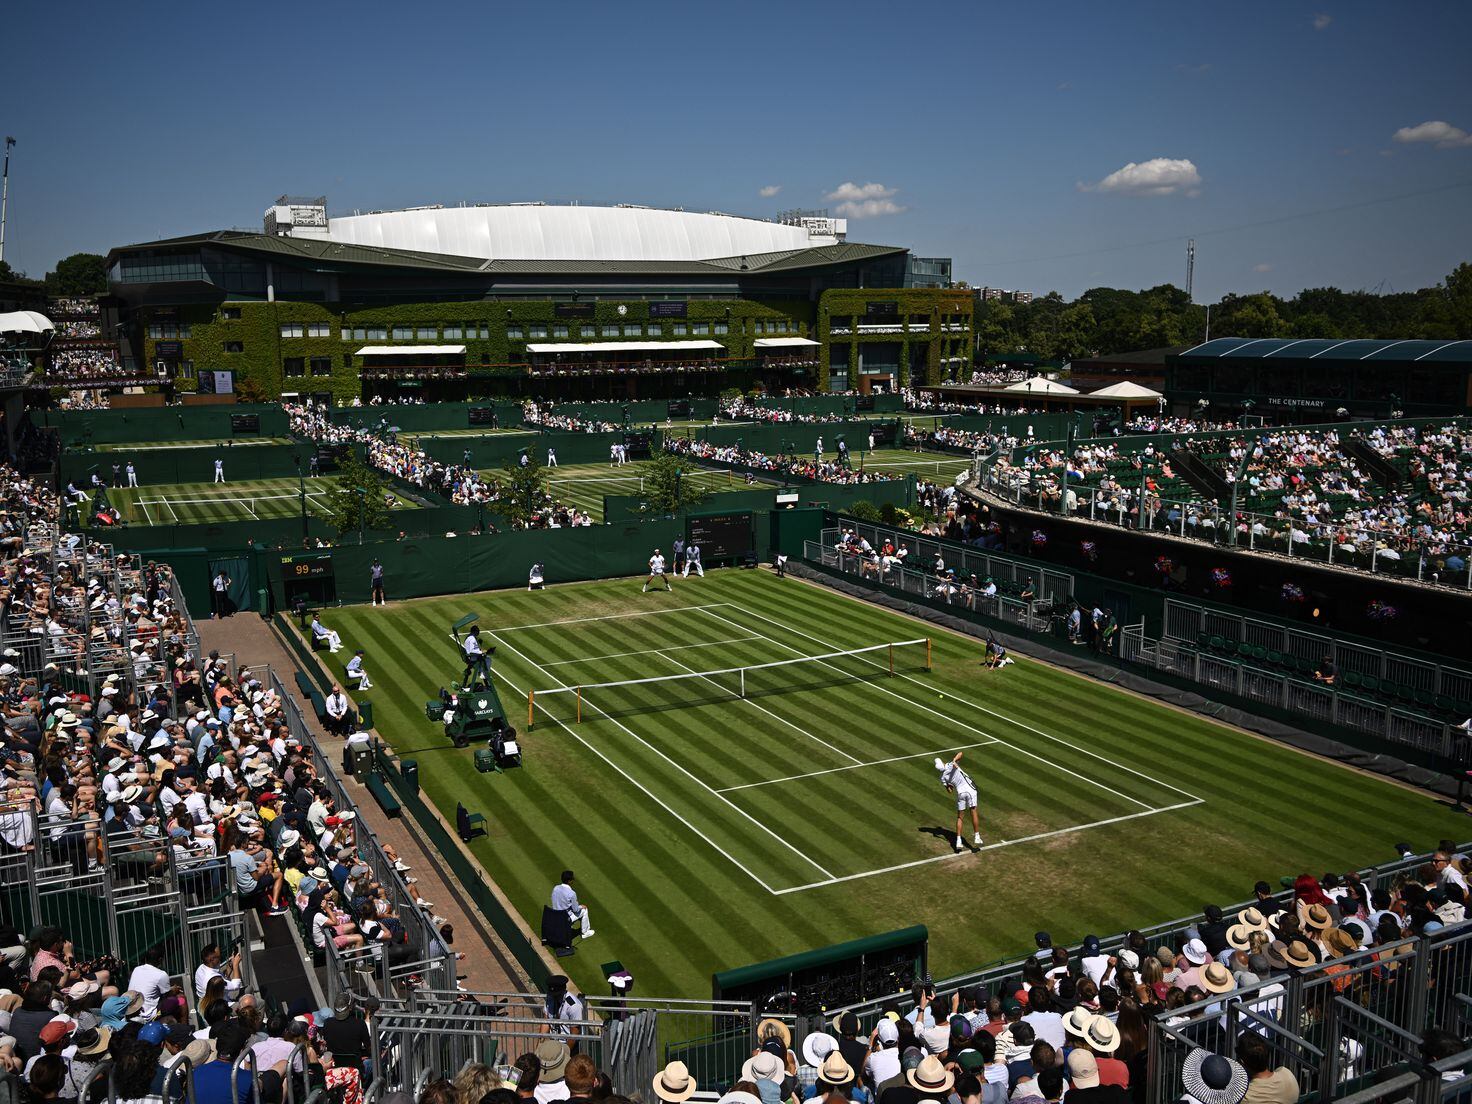 The first-timer's guide to visiting Wimbledon Tennis Championships